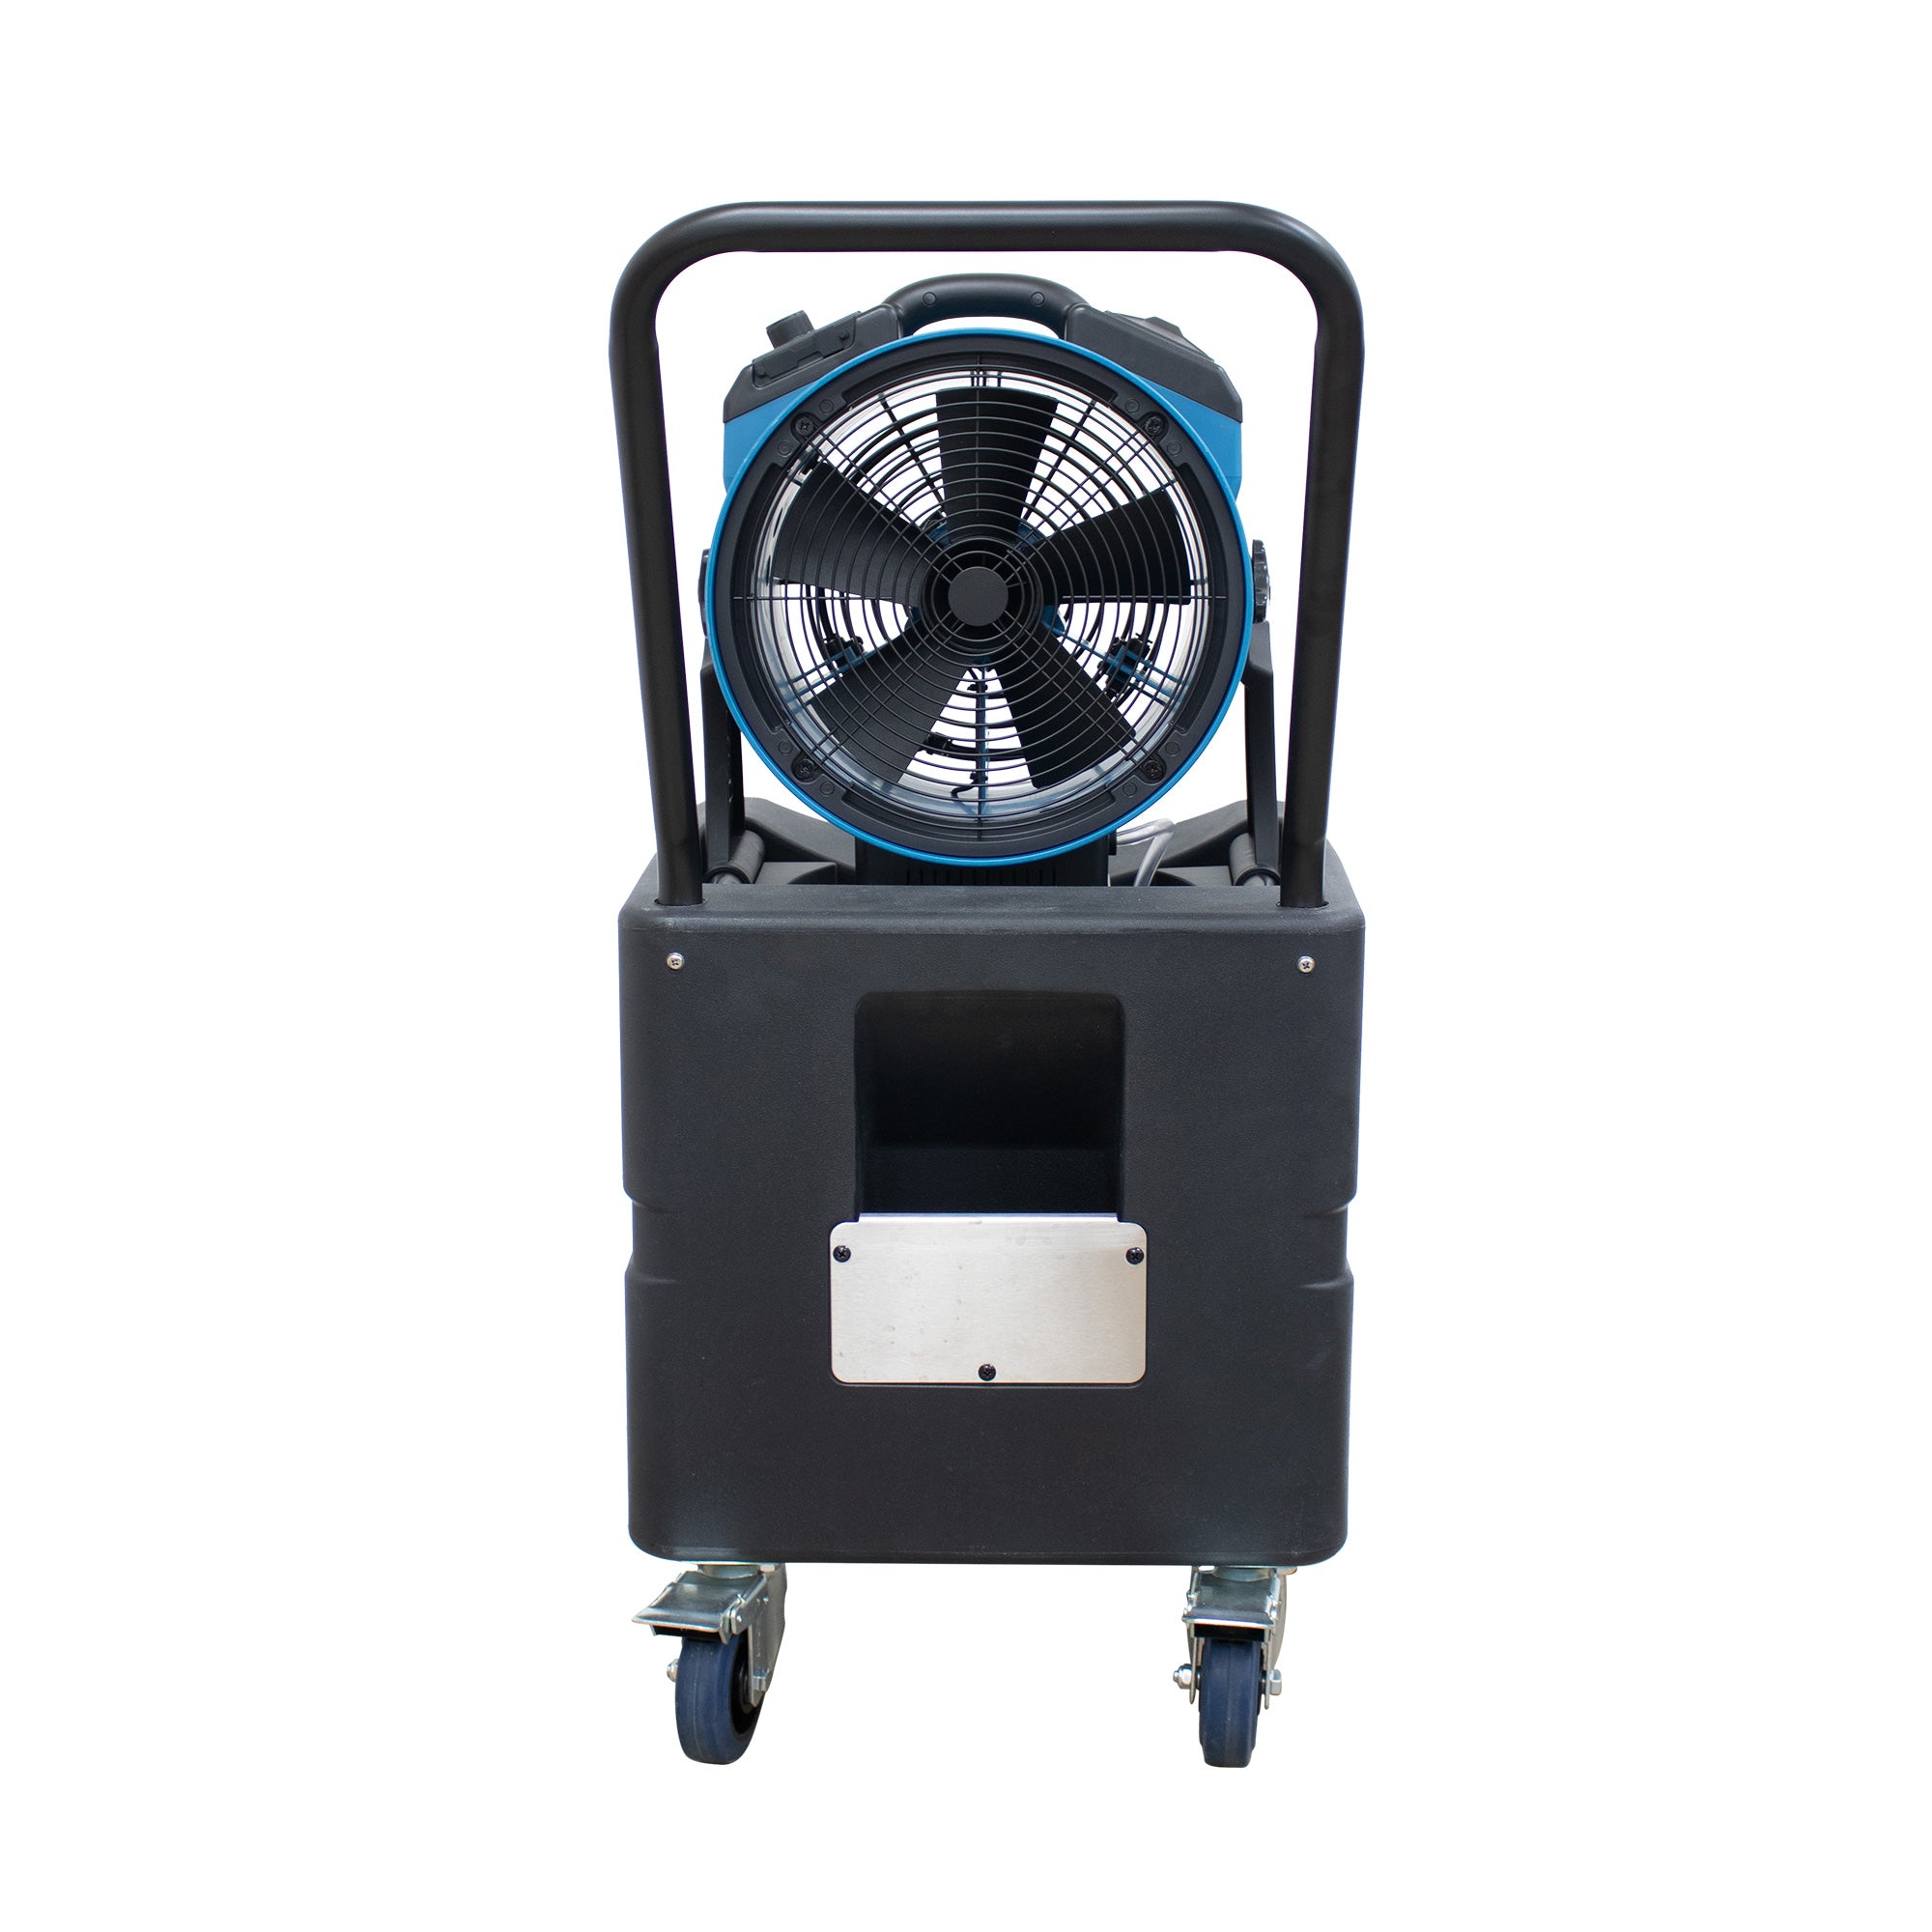 XPOWER FM-65WBK Battery Operated Rechargeable Variable Speed Outdoor Cooling Misting Fan with Built-In Water Pump, Hose, and WT-35 Mobile Water Reservoir Tank